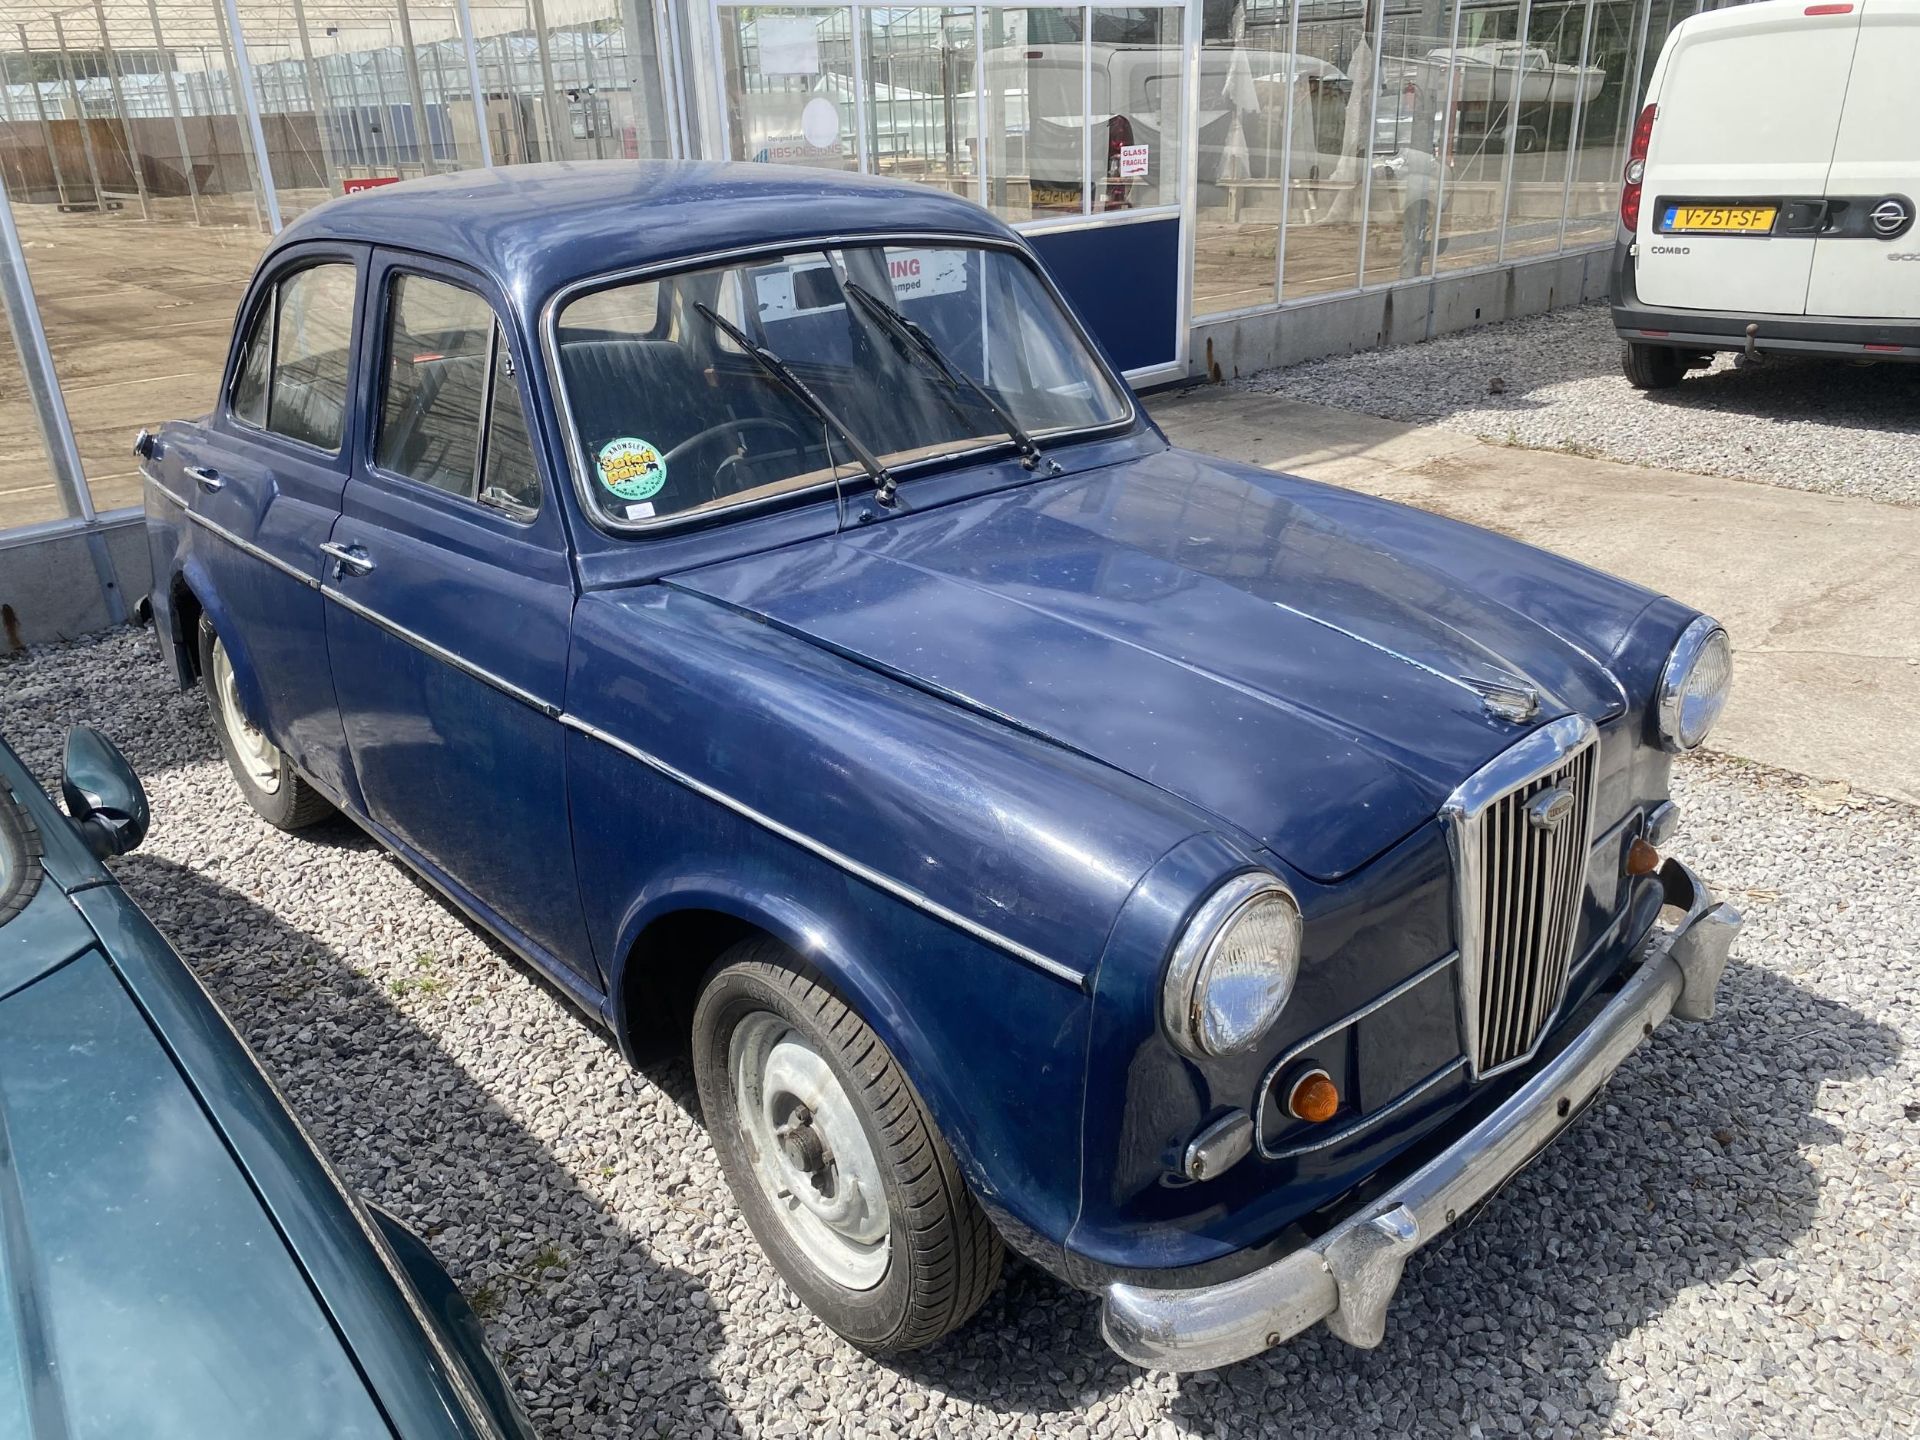 A ONE OWNER FROM NEW, 35 YEAR BARN STORED WOLSELEY 1500 PETROL CAR, APPROX 28000 MILES ON THE CLOCK,